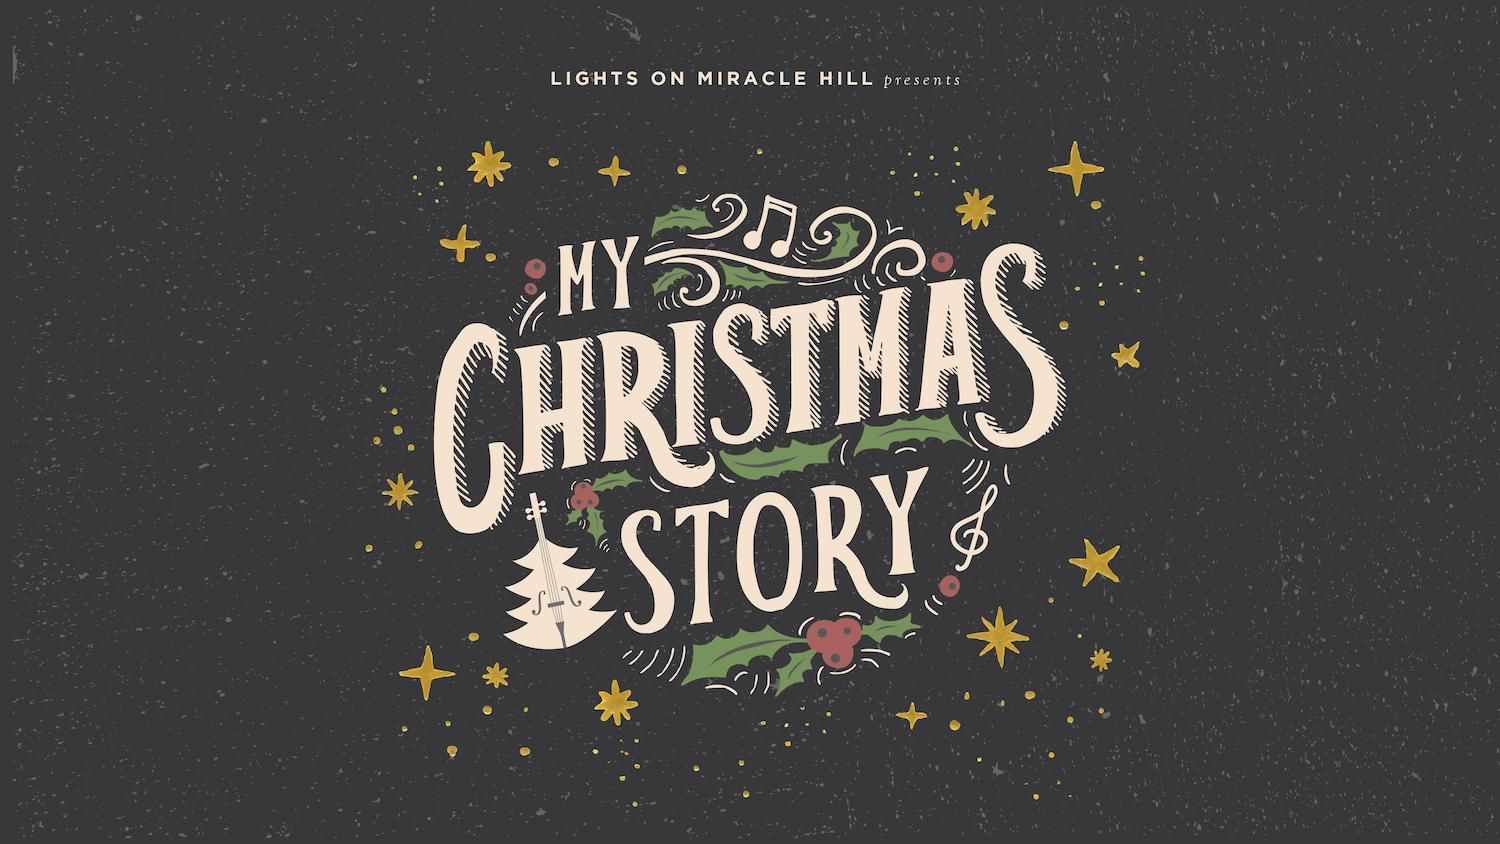 city blessing church lights on miracle hill 2019